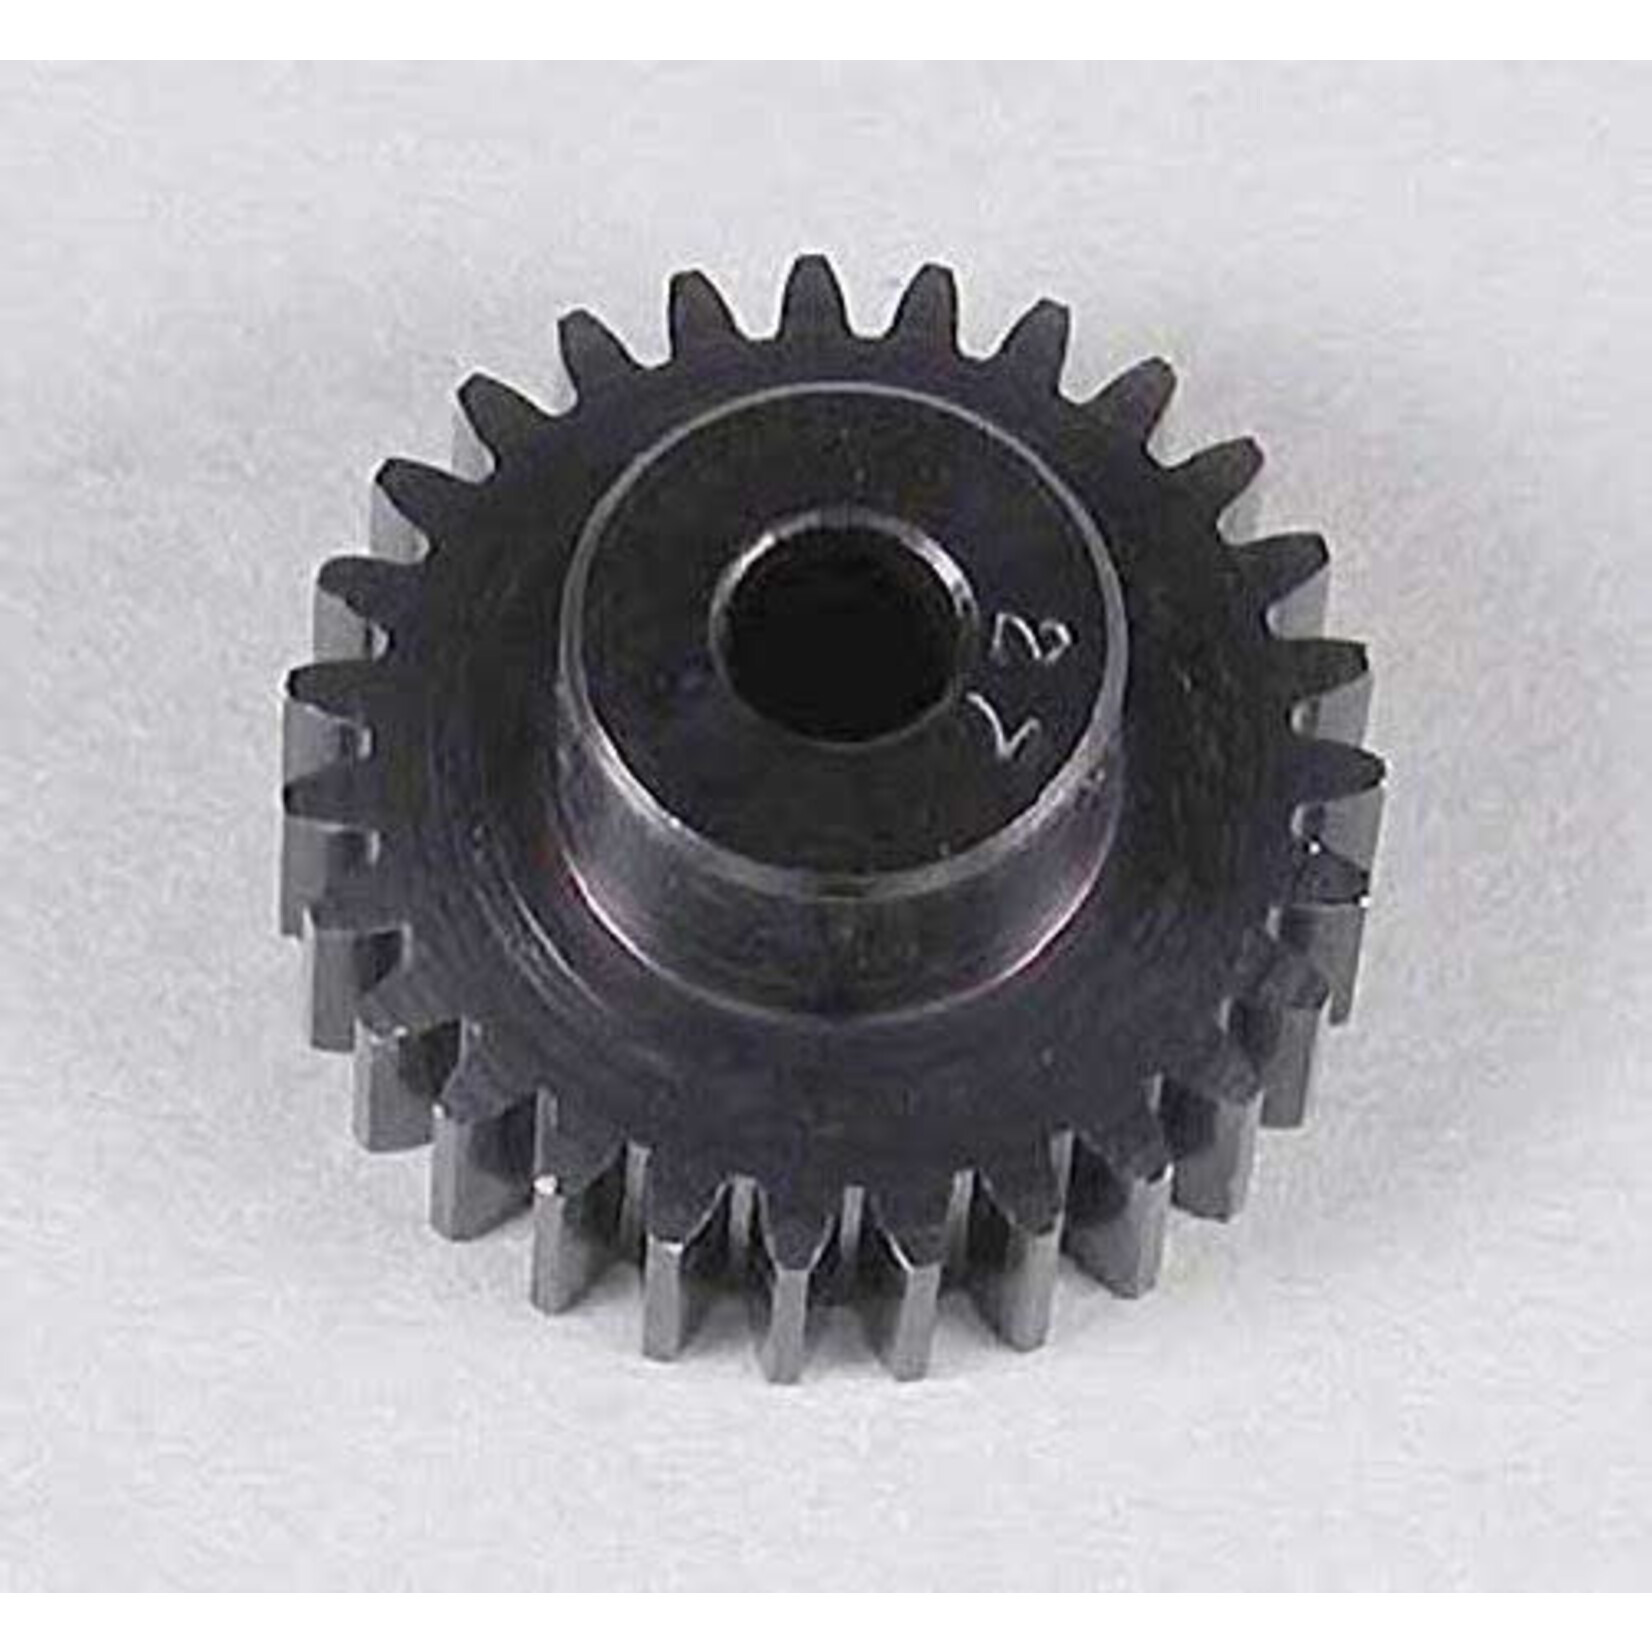 Robinson Racing Products (RRP) 48P Hard Coated Aluminum Pinion Gear, 27T